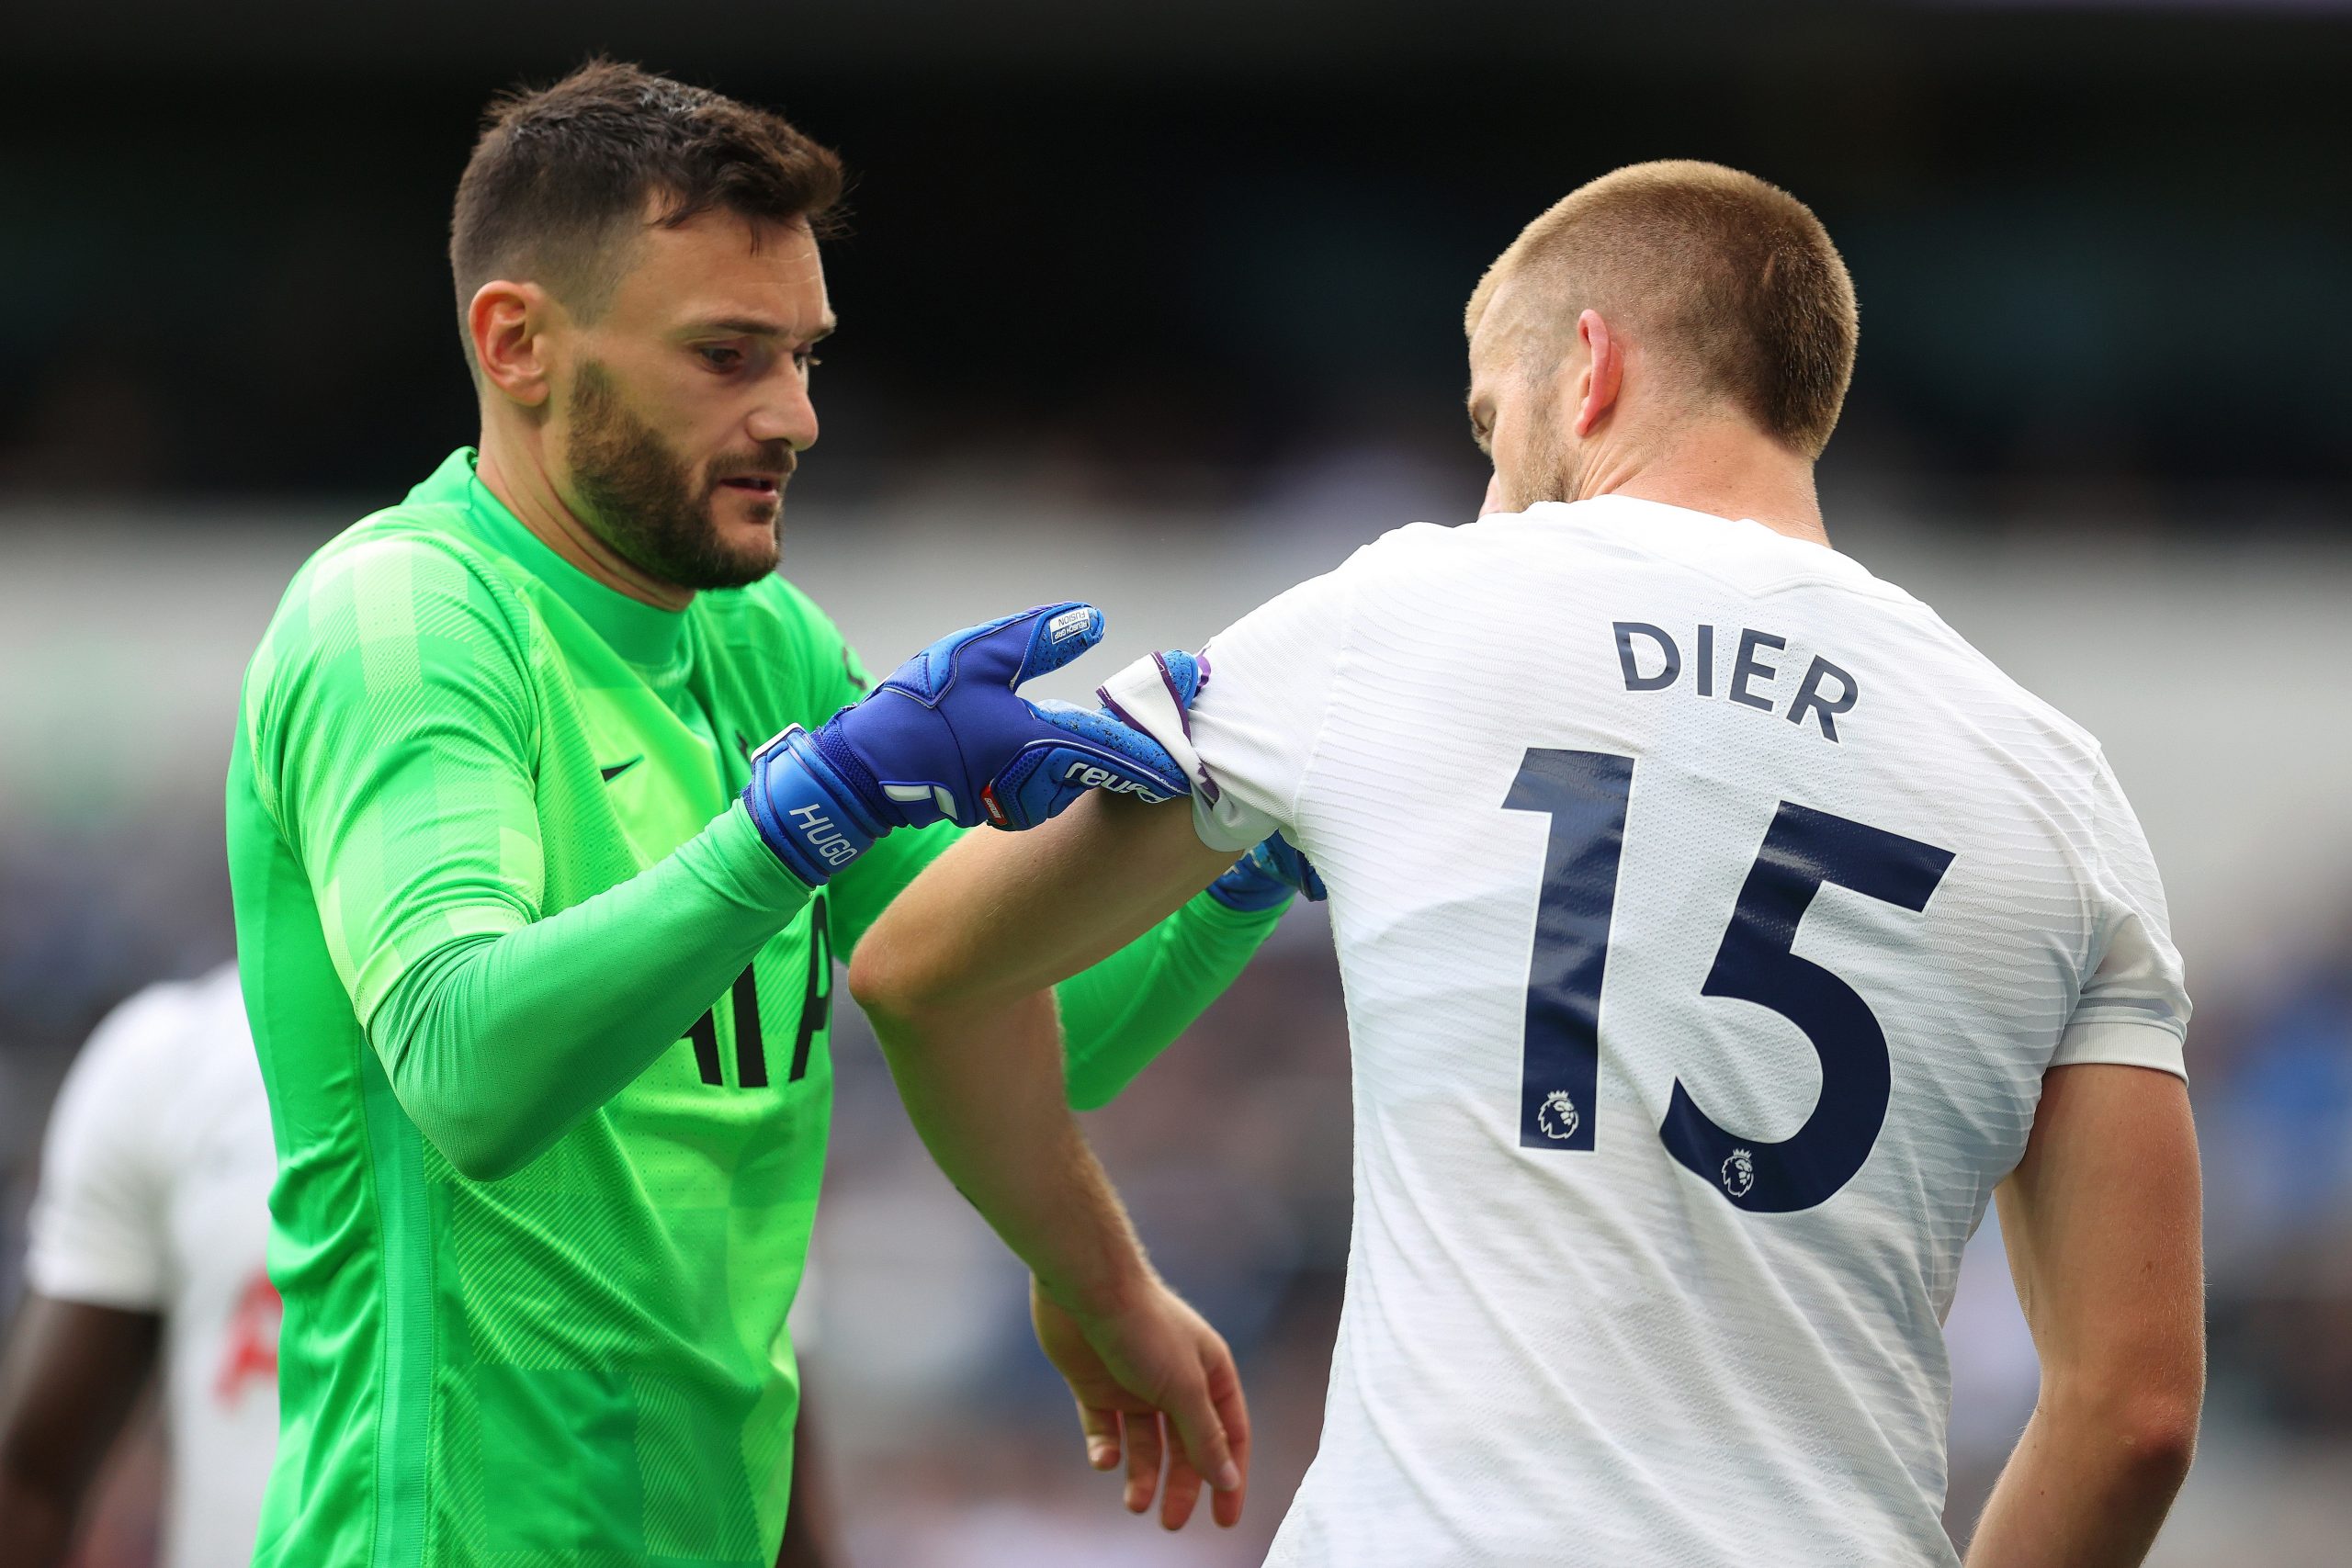 Eric Dier is all set to join Bayern Munich once Tottenham Hotspur contract expires.